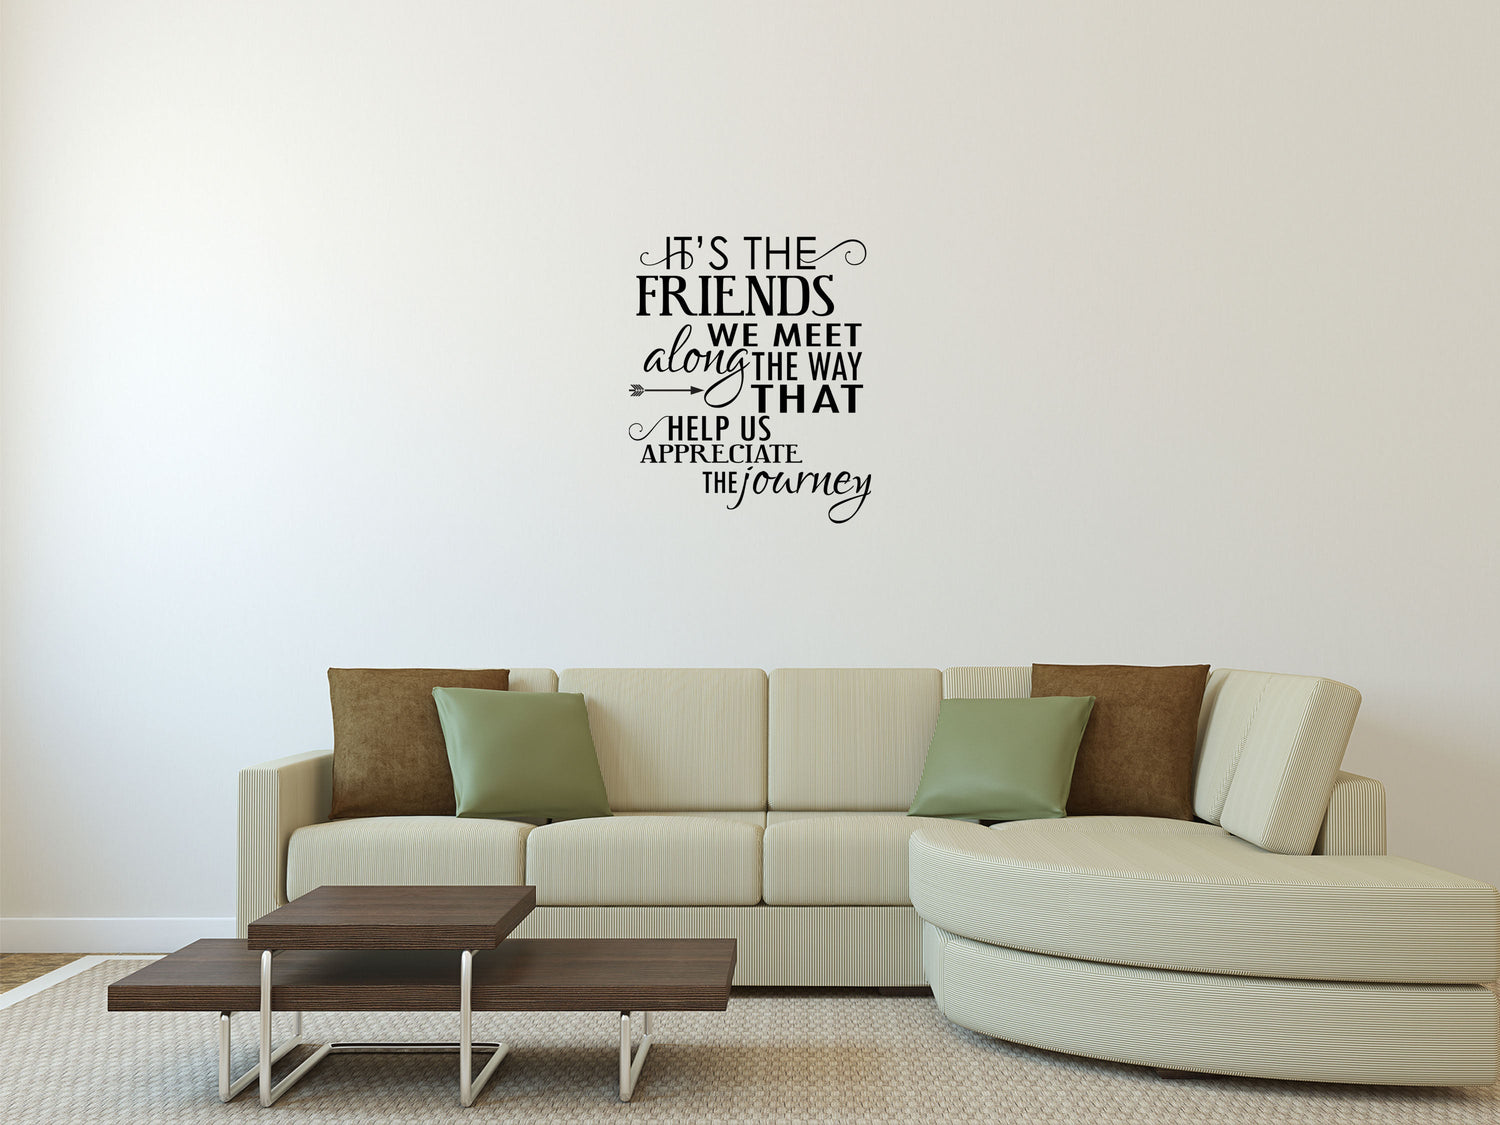 Inspirational Wall Decals - Uplifting Quotes for Home & Office